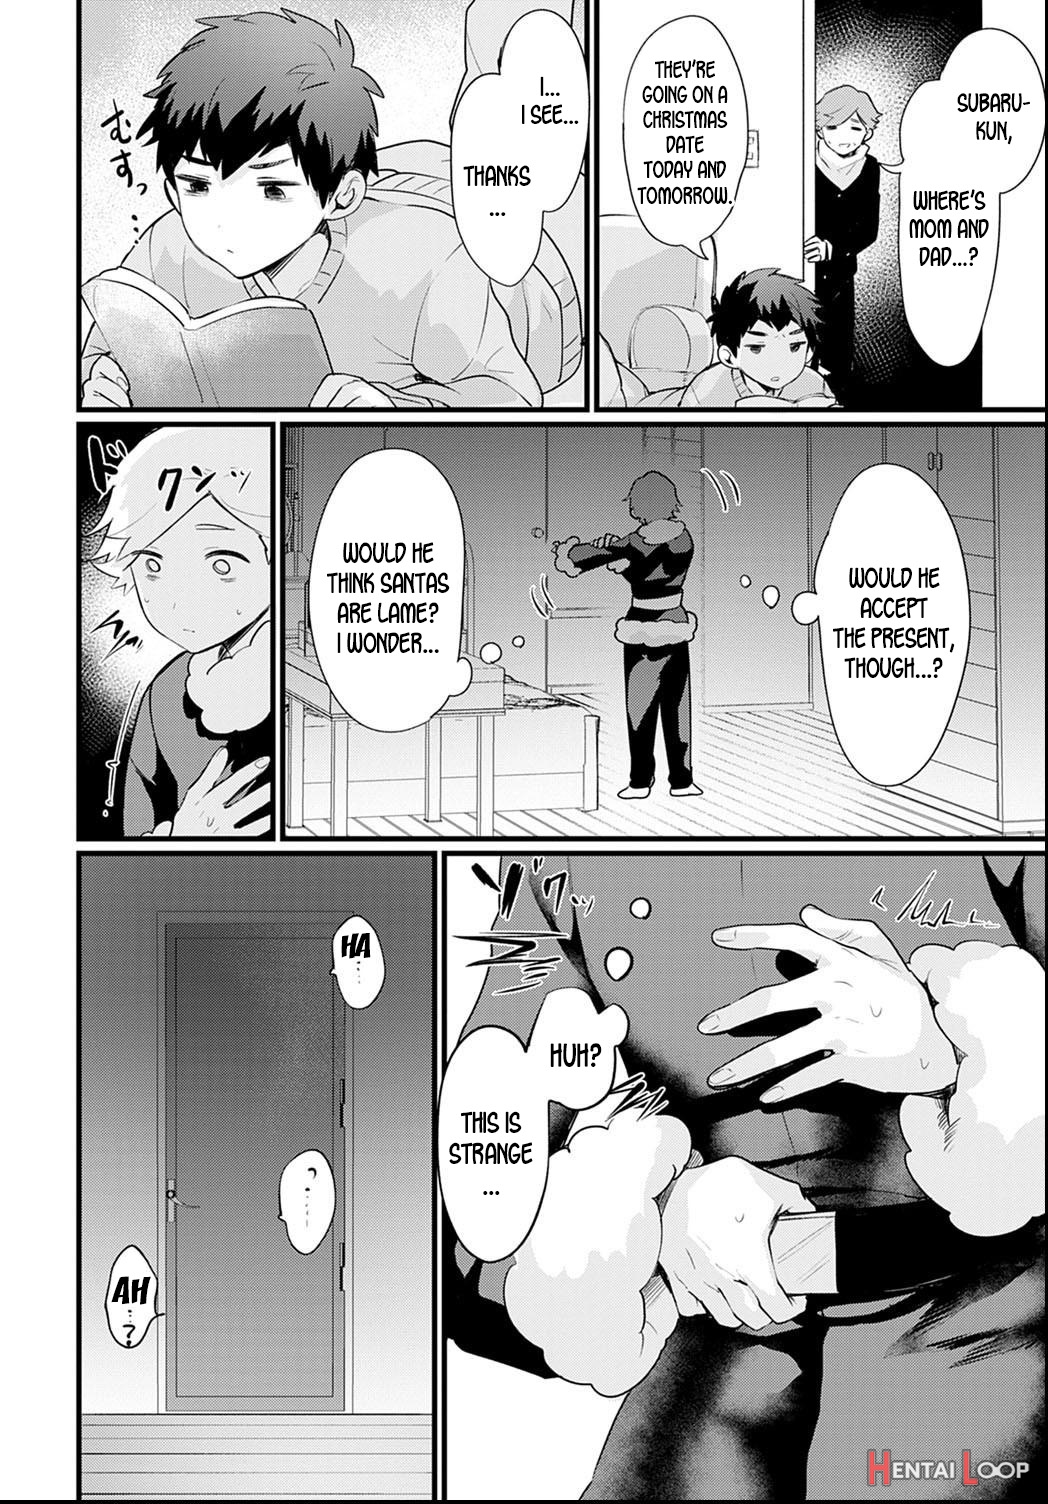 From Now On, I’m The Onee-chan! page 4